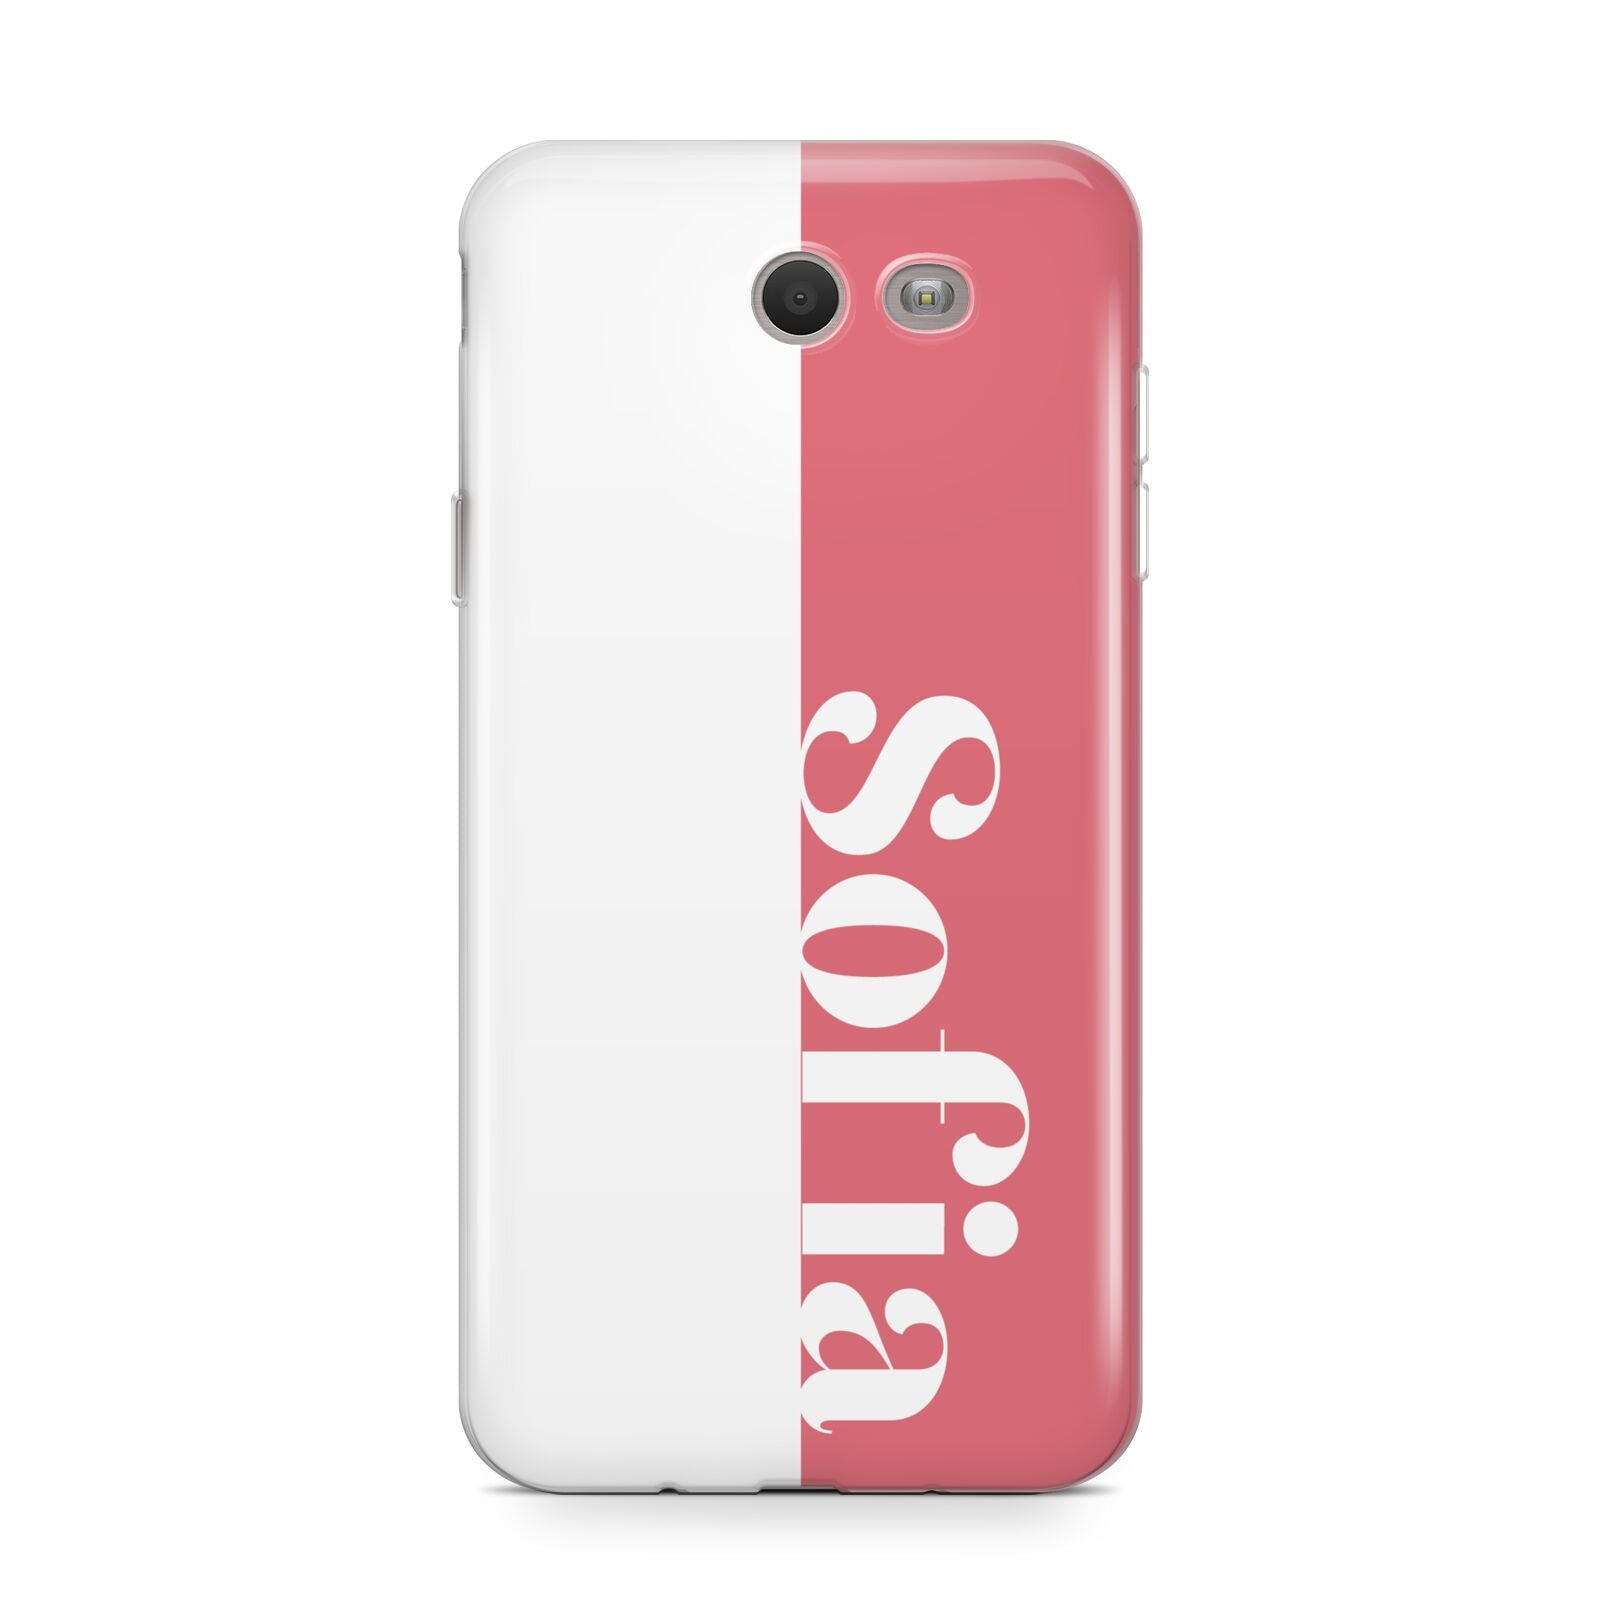 Pink White Personalised Samsung Galaxy J7 2017 Case